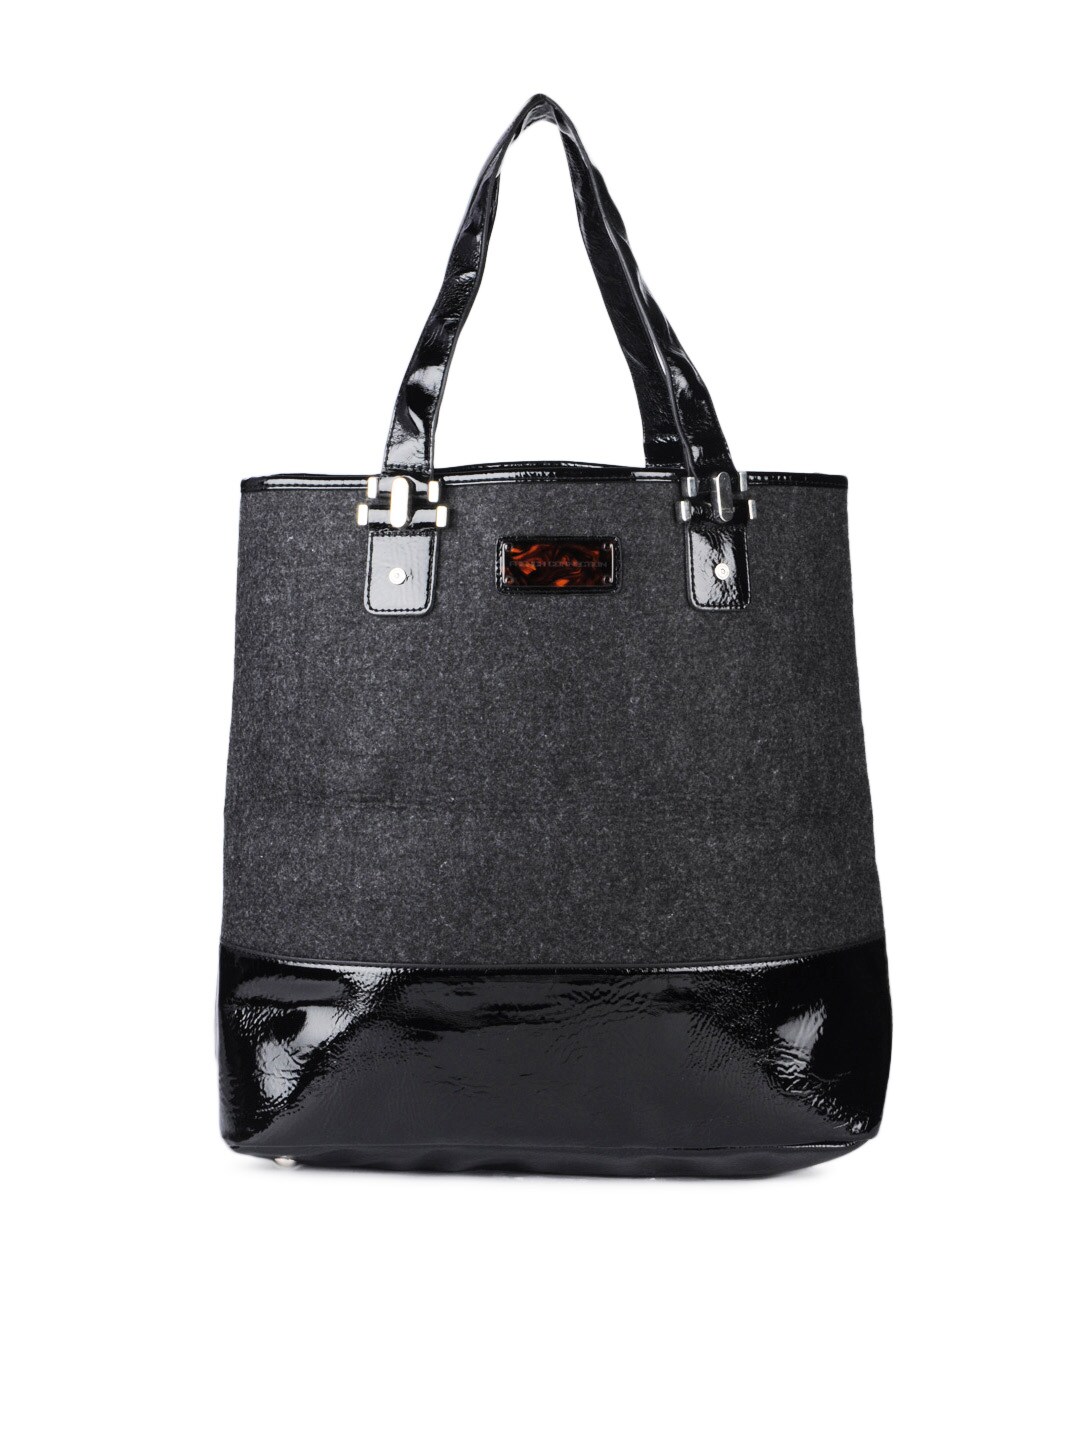 French Connection Women Charcoal Handbag